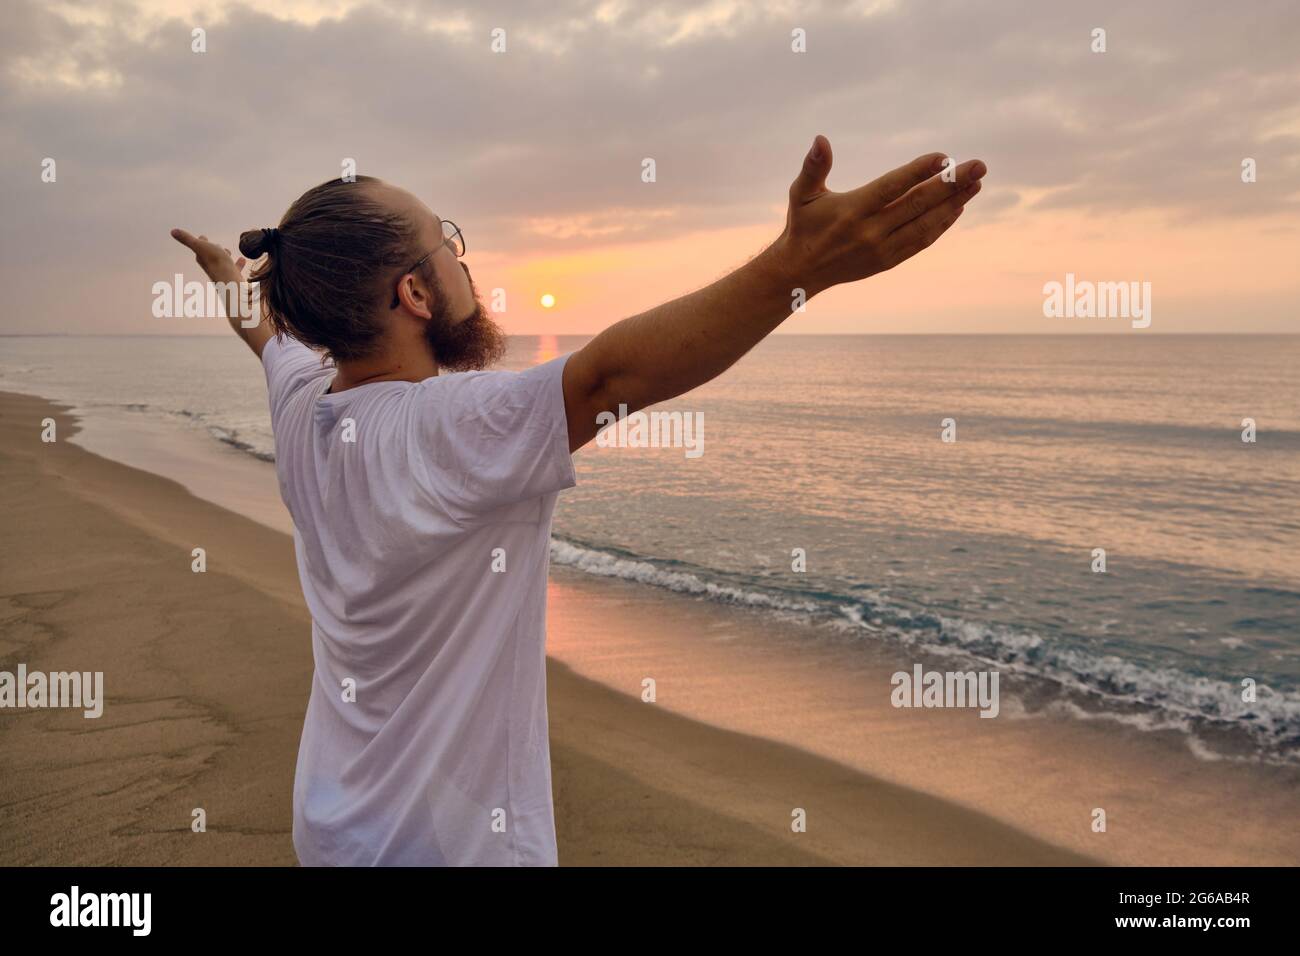 Yoga Meditation In Lotus Pose By Man On The Beach Near The Ocean In India  Stock Photo, Picture and Royalty Free Image. Image 19908503.